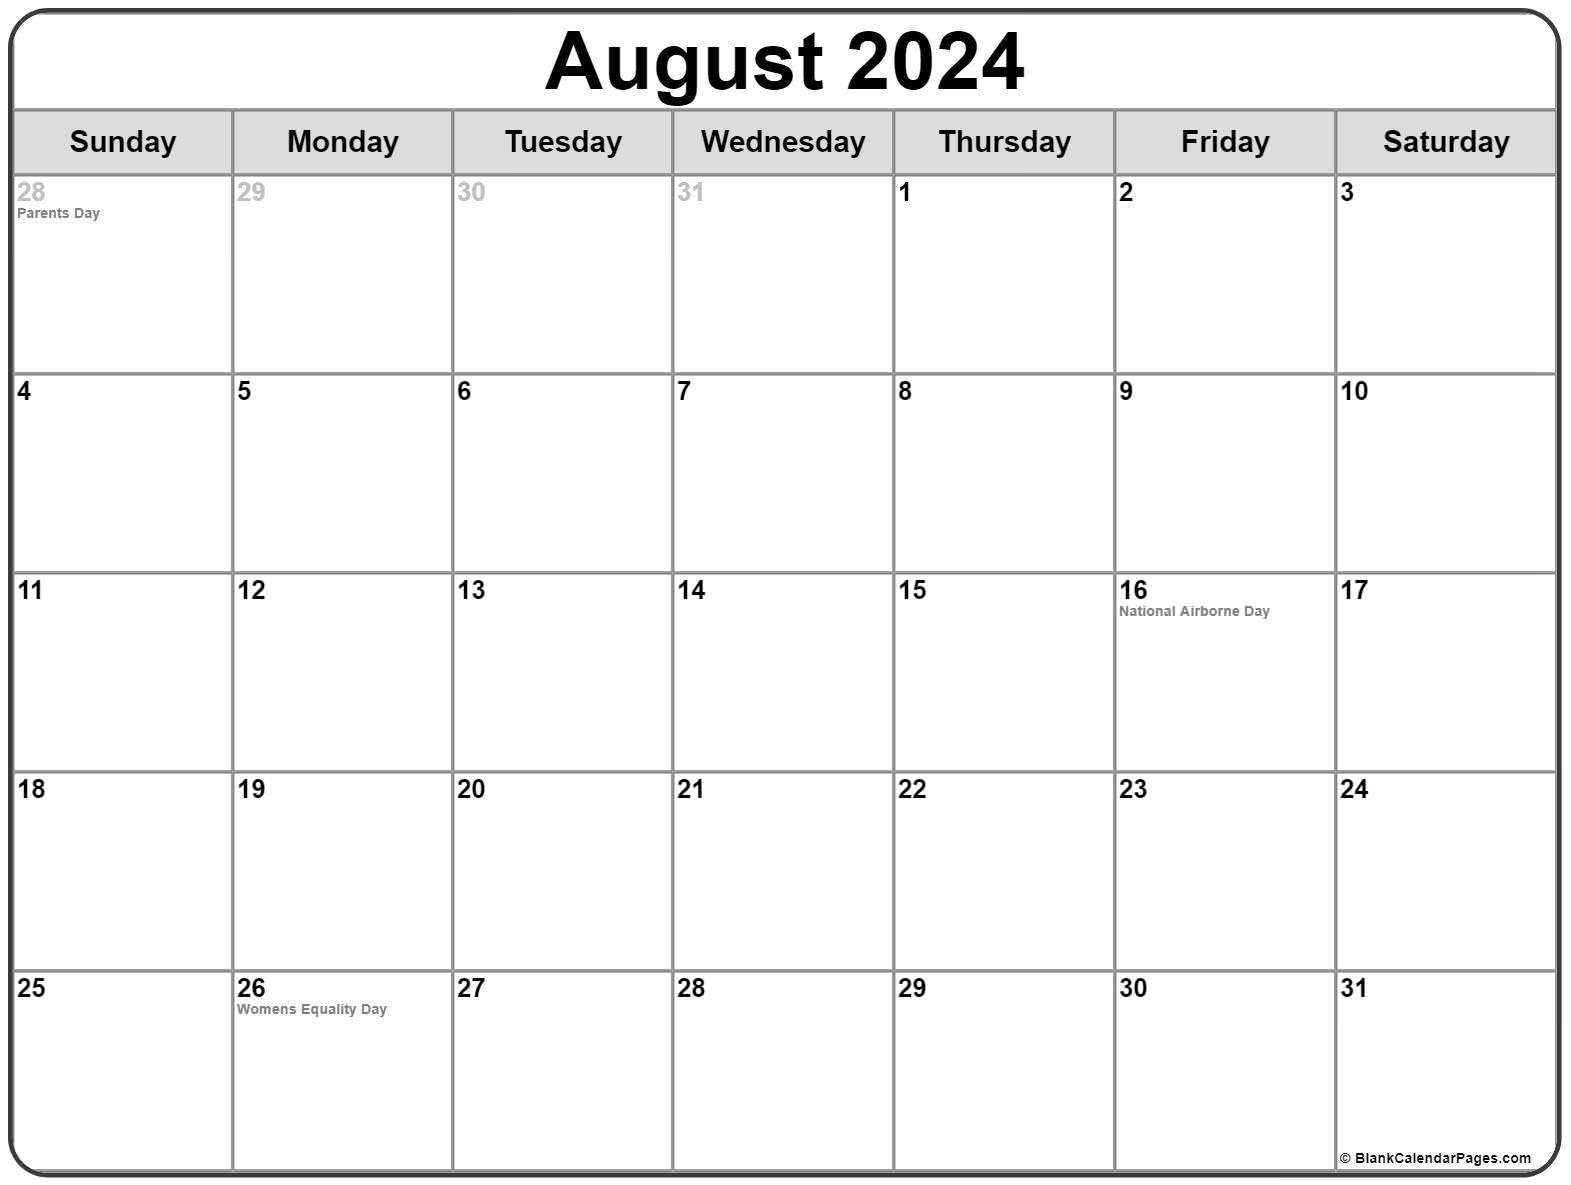 Collection of August 2019 calendars with holidays1571 x 1185